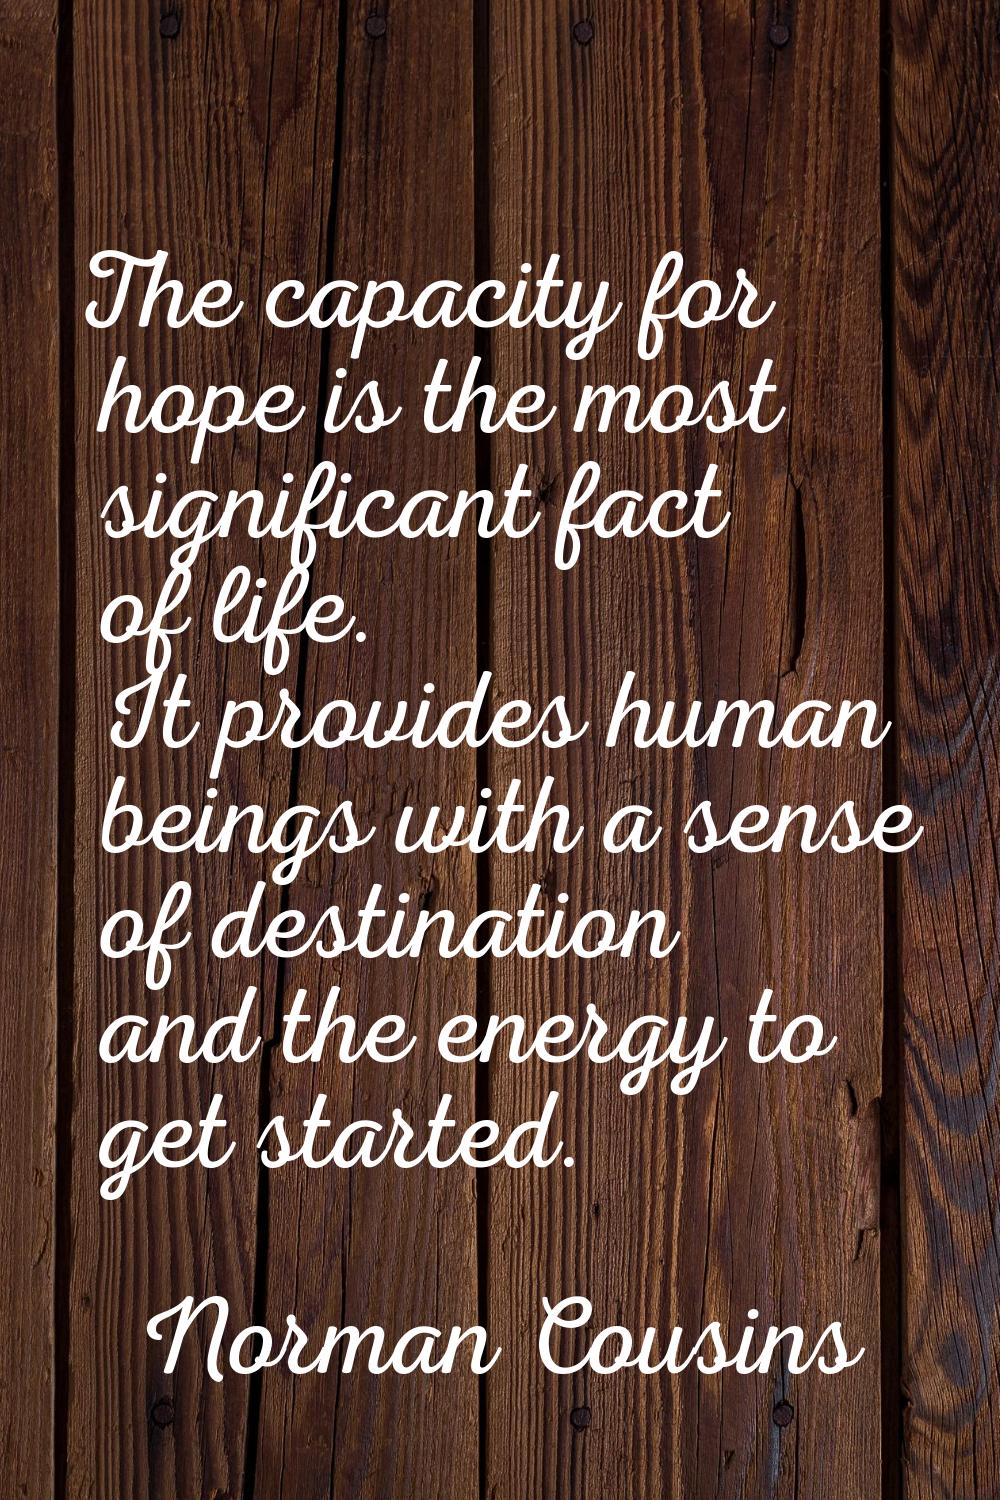 The capacity for hope is the most significant fact of life. It provides human beings with a sense o